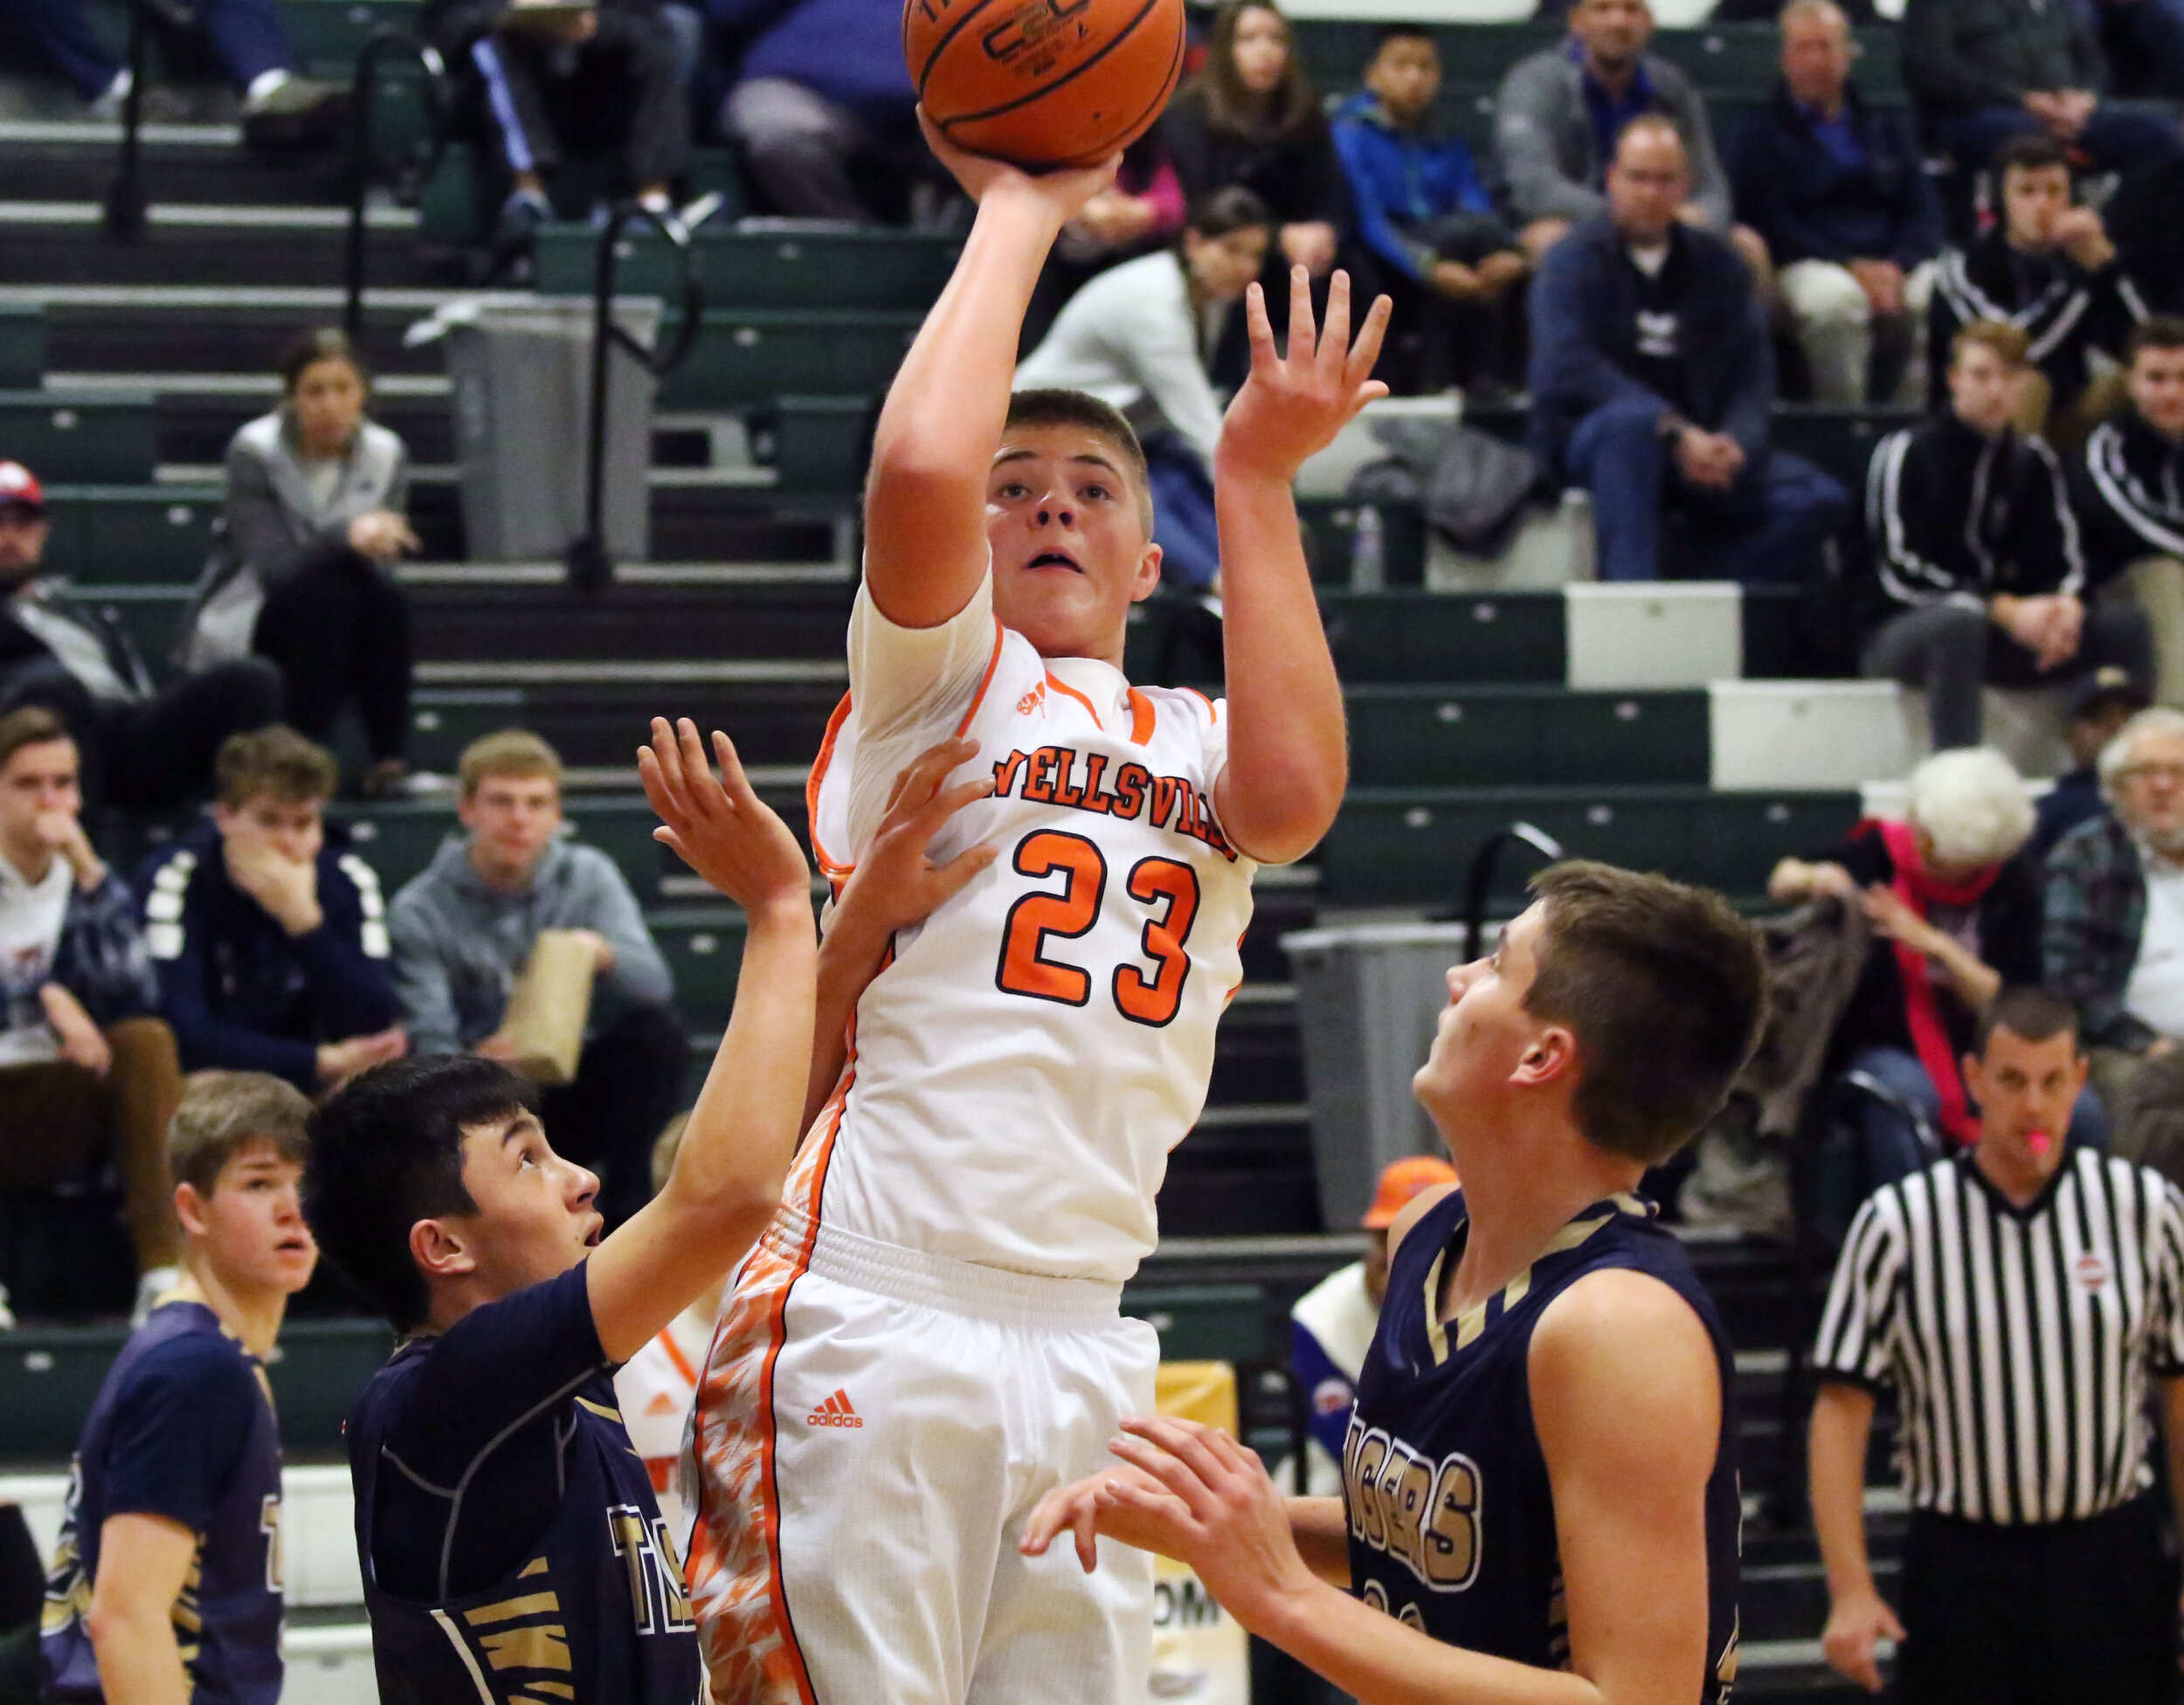  Wellsville’s Logan Dunbar (23) puts up a shot, as the North Penn-Mansfield defense swarms to make a play during Monday afternoon’s championship game of the Josh Palmer Holiday Classic in Elmira. [Chris Brooks/WellsvilleSports.com] 